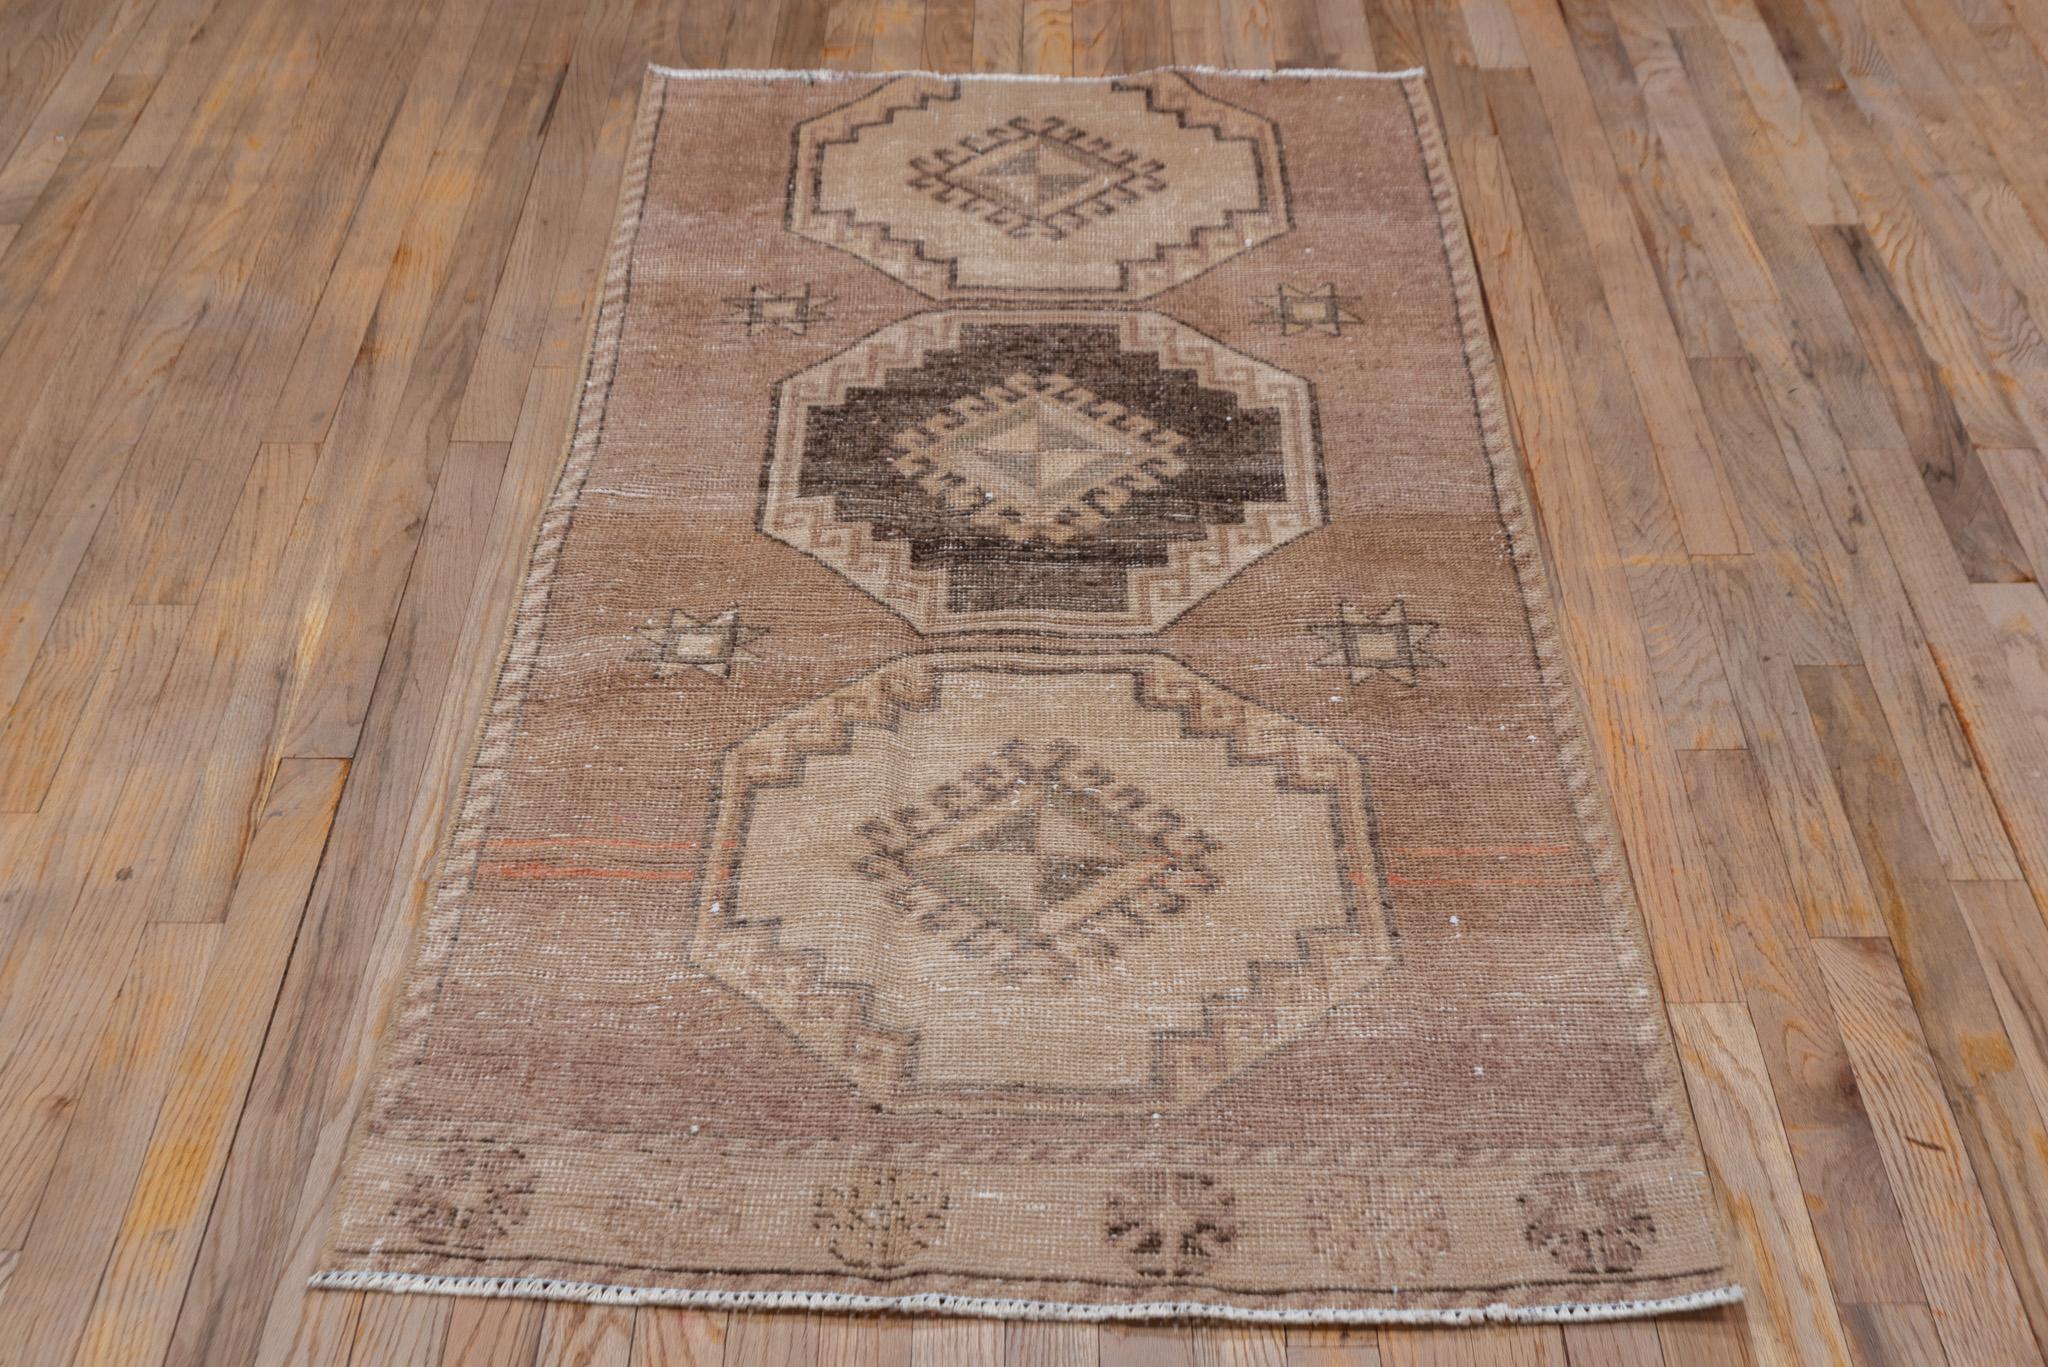 An Oushak Rug circa 1940. Handknotted with 100% wool yarn.